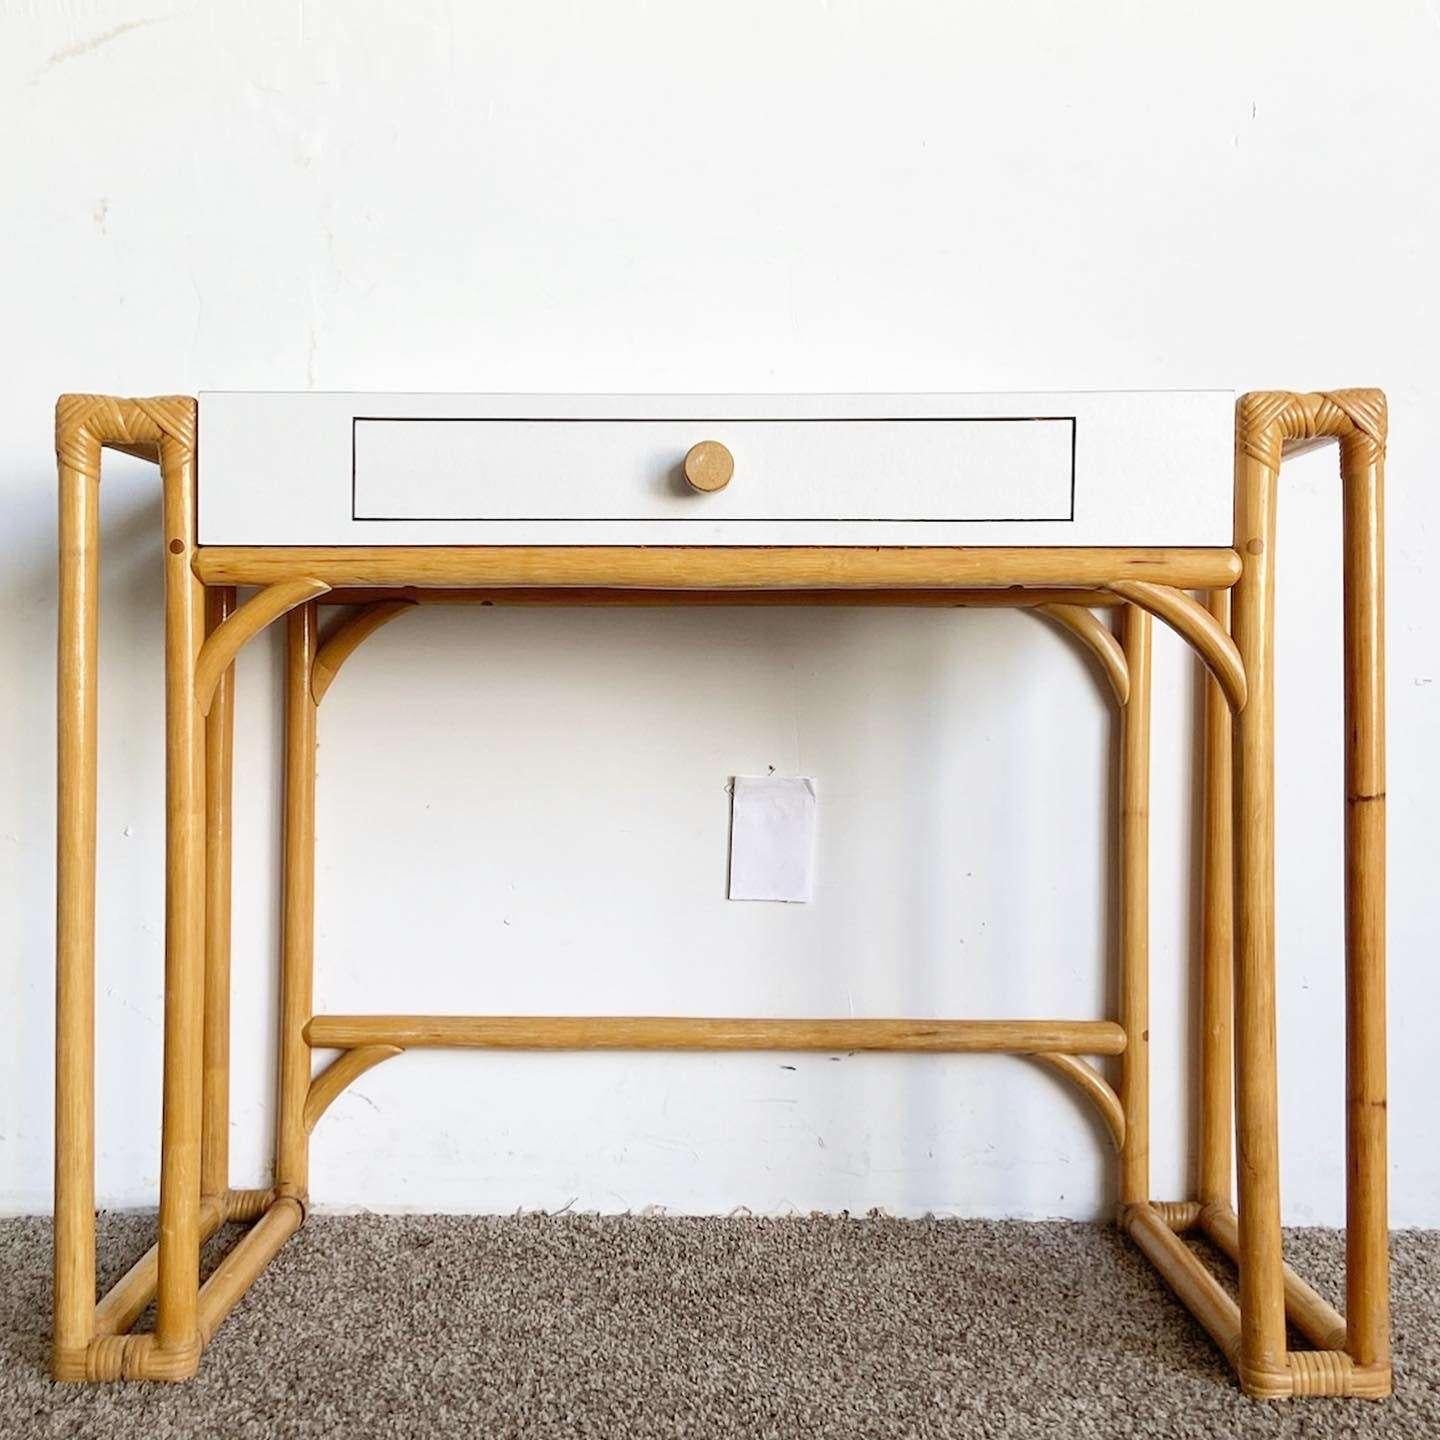 Incredible vintage boho chic writing desk. Features bamboo rattan frame with a matte white laminate table top with one central drawer.